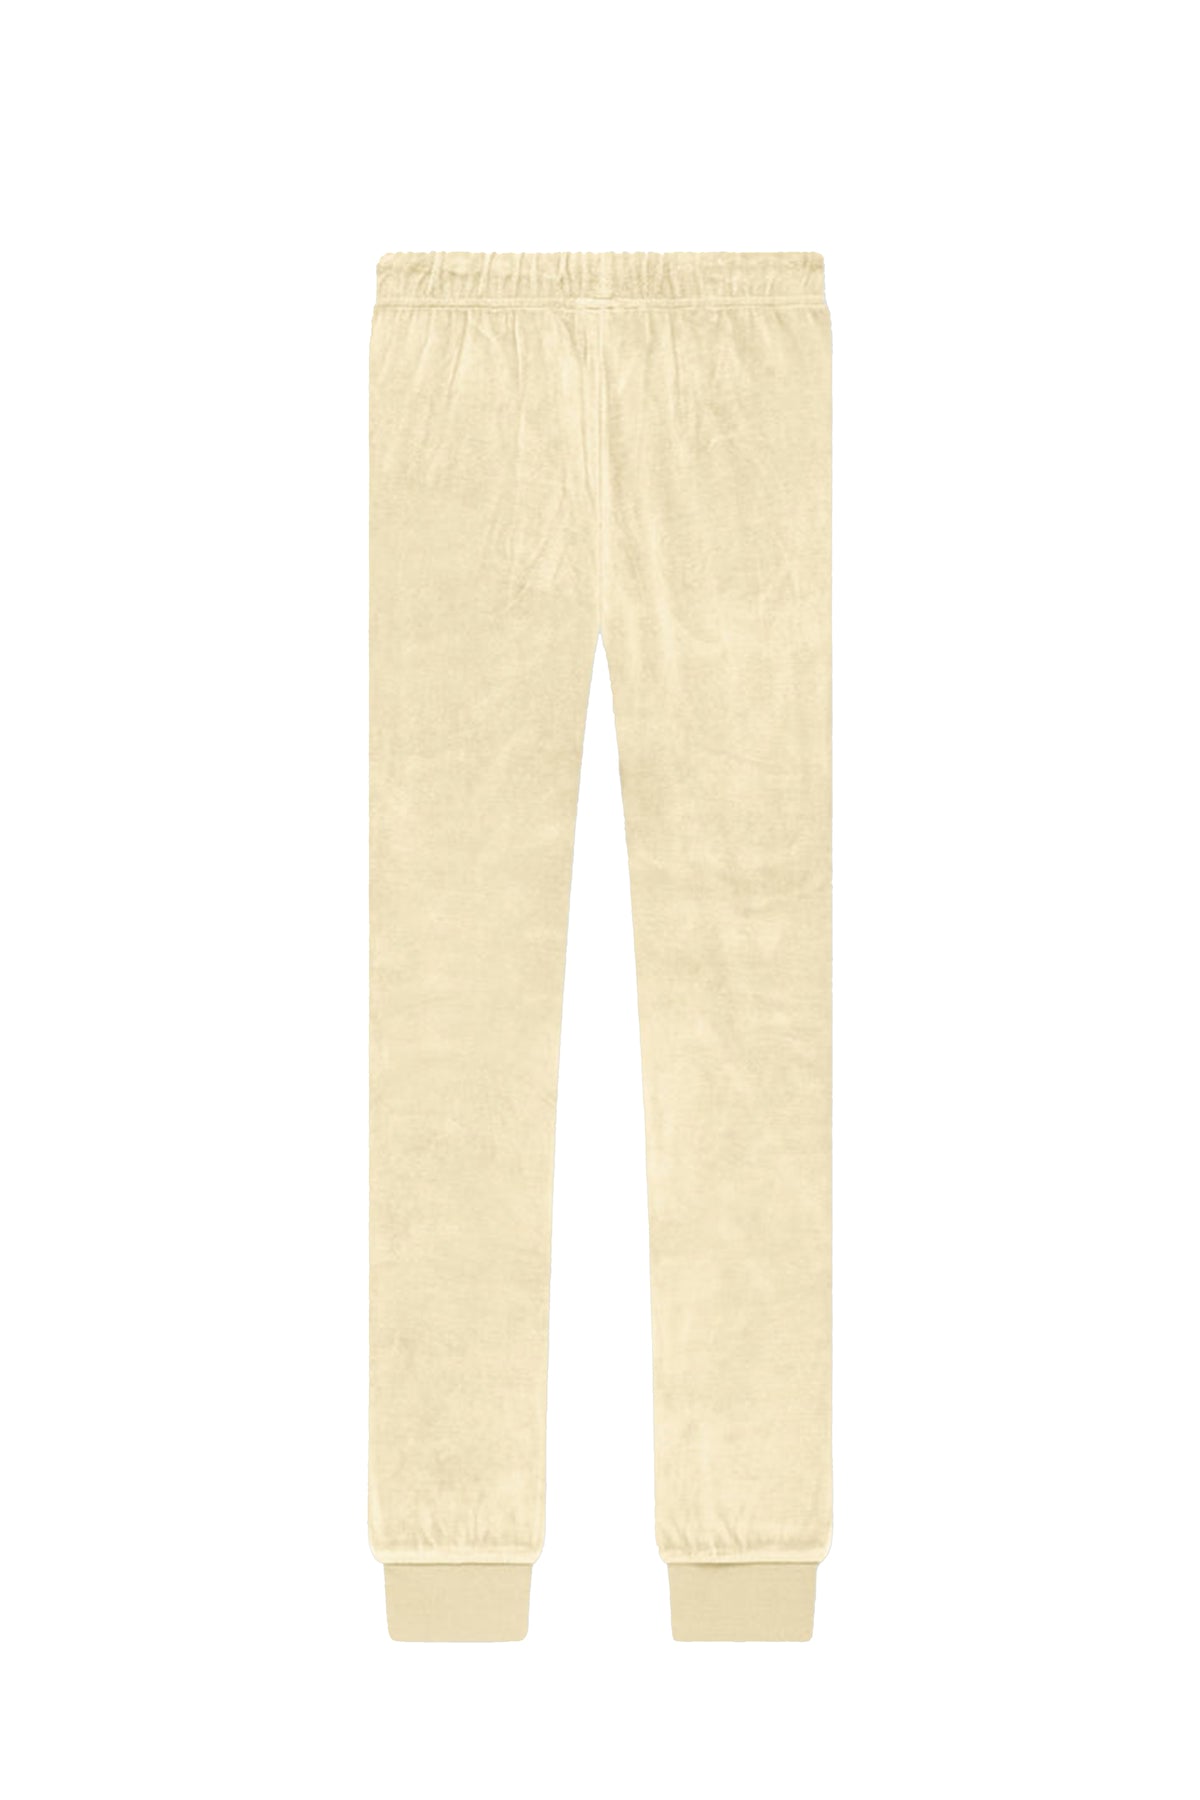 VELOUR PANT / CANARY